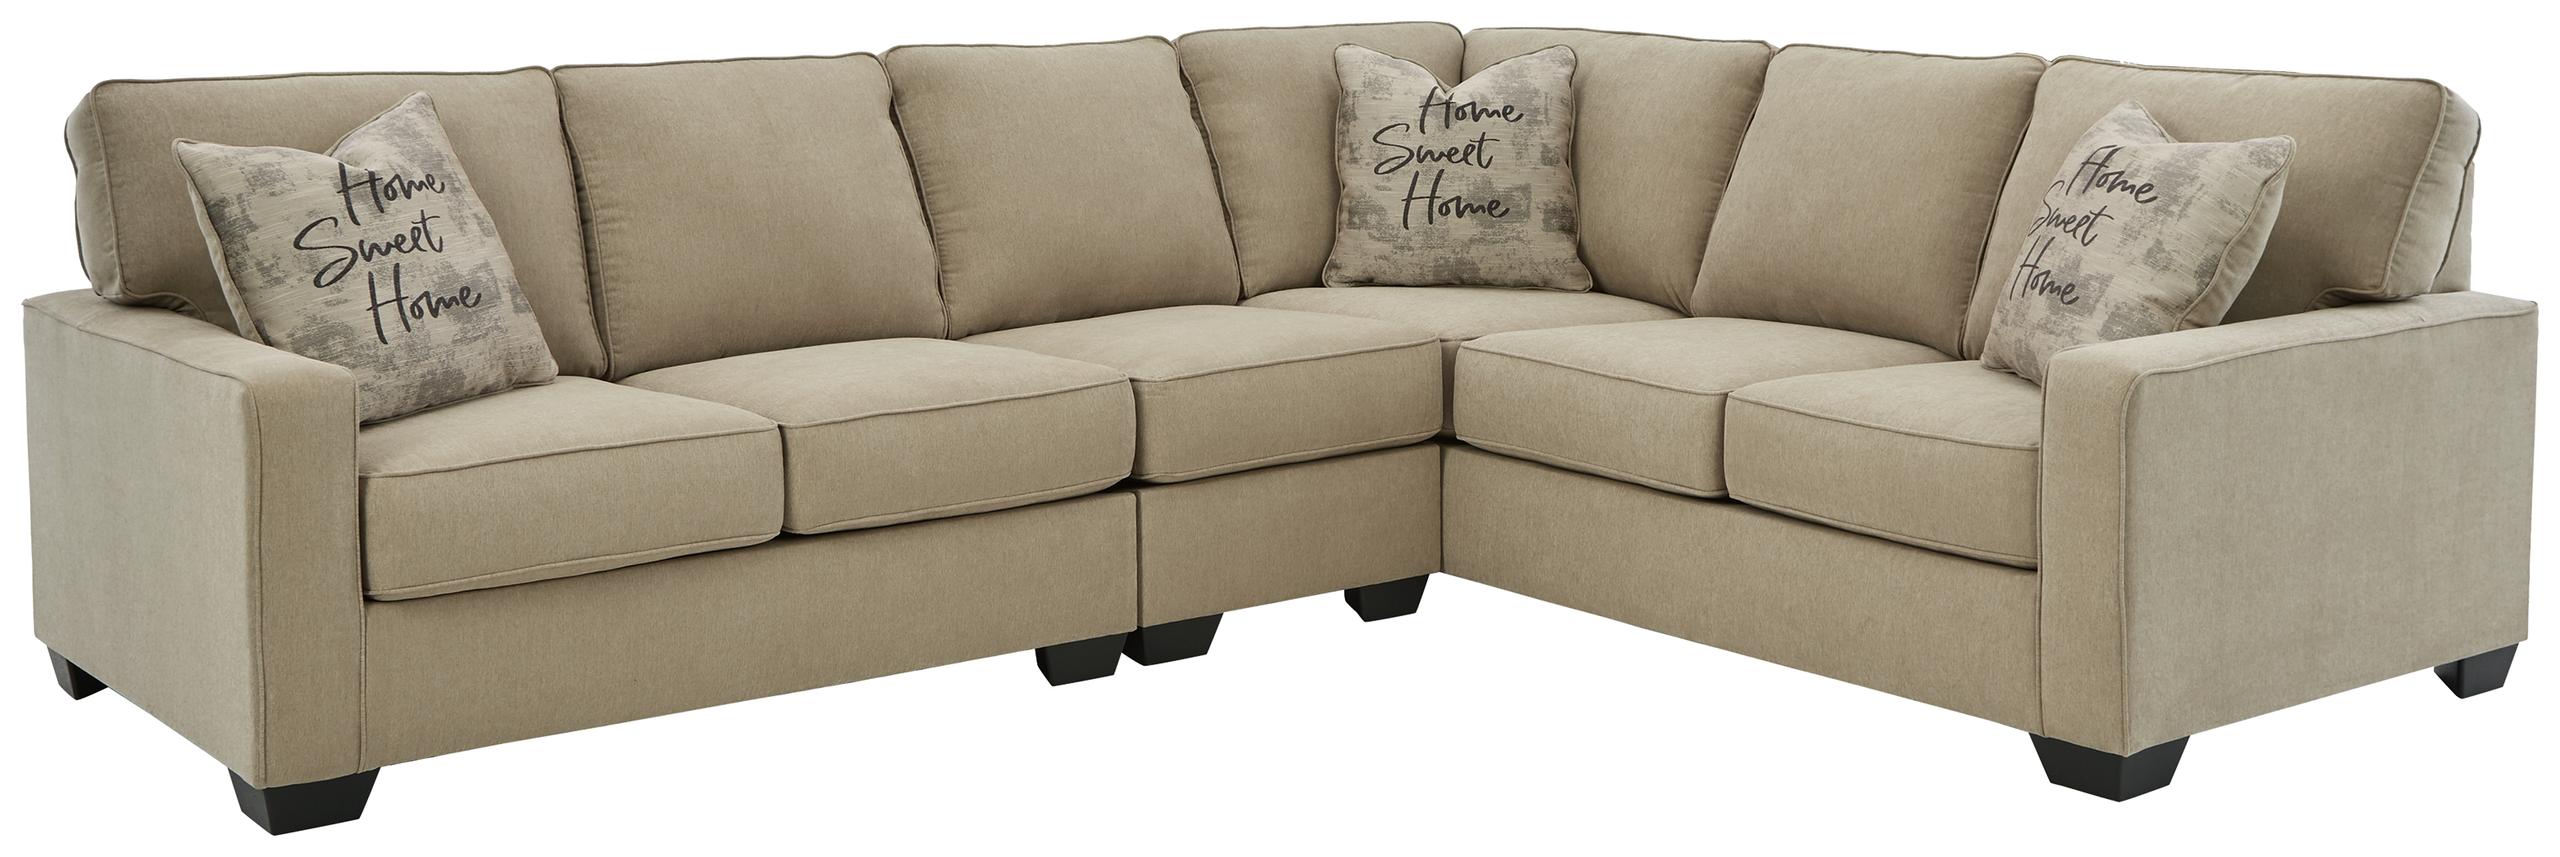 ASHLEY FURNITURE 59006S4 Lucina 3-piece Sectional